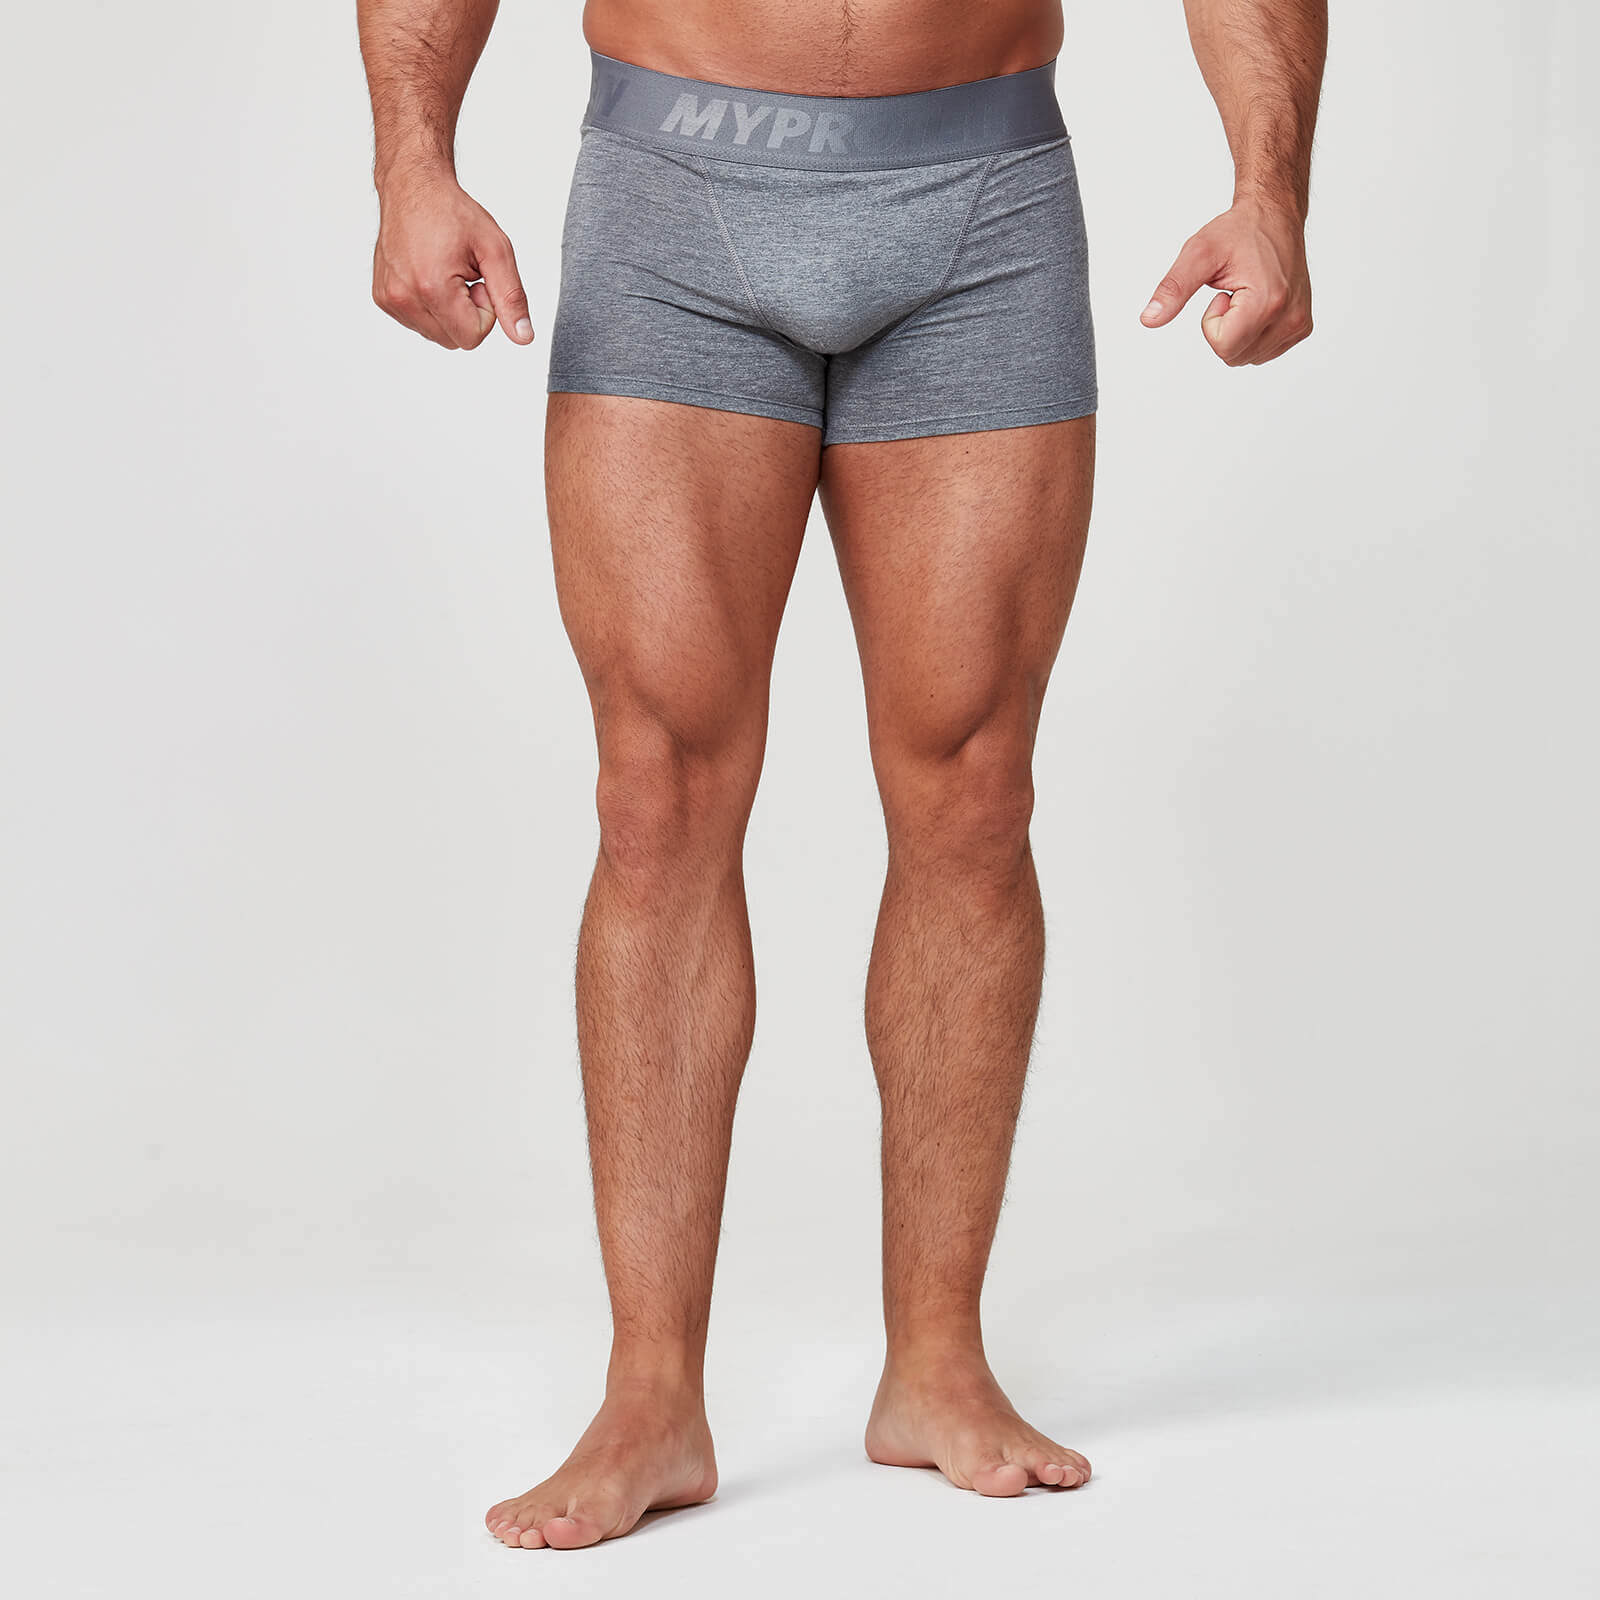 Myprotein Men's 2 Pack Mid Boxers - Charcoal